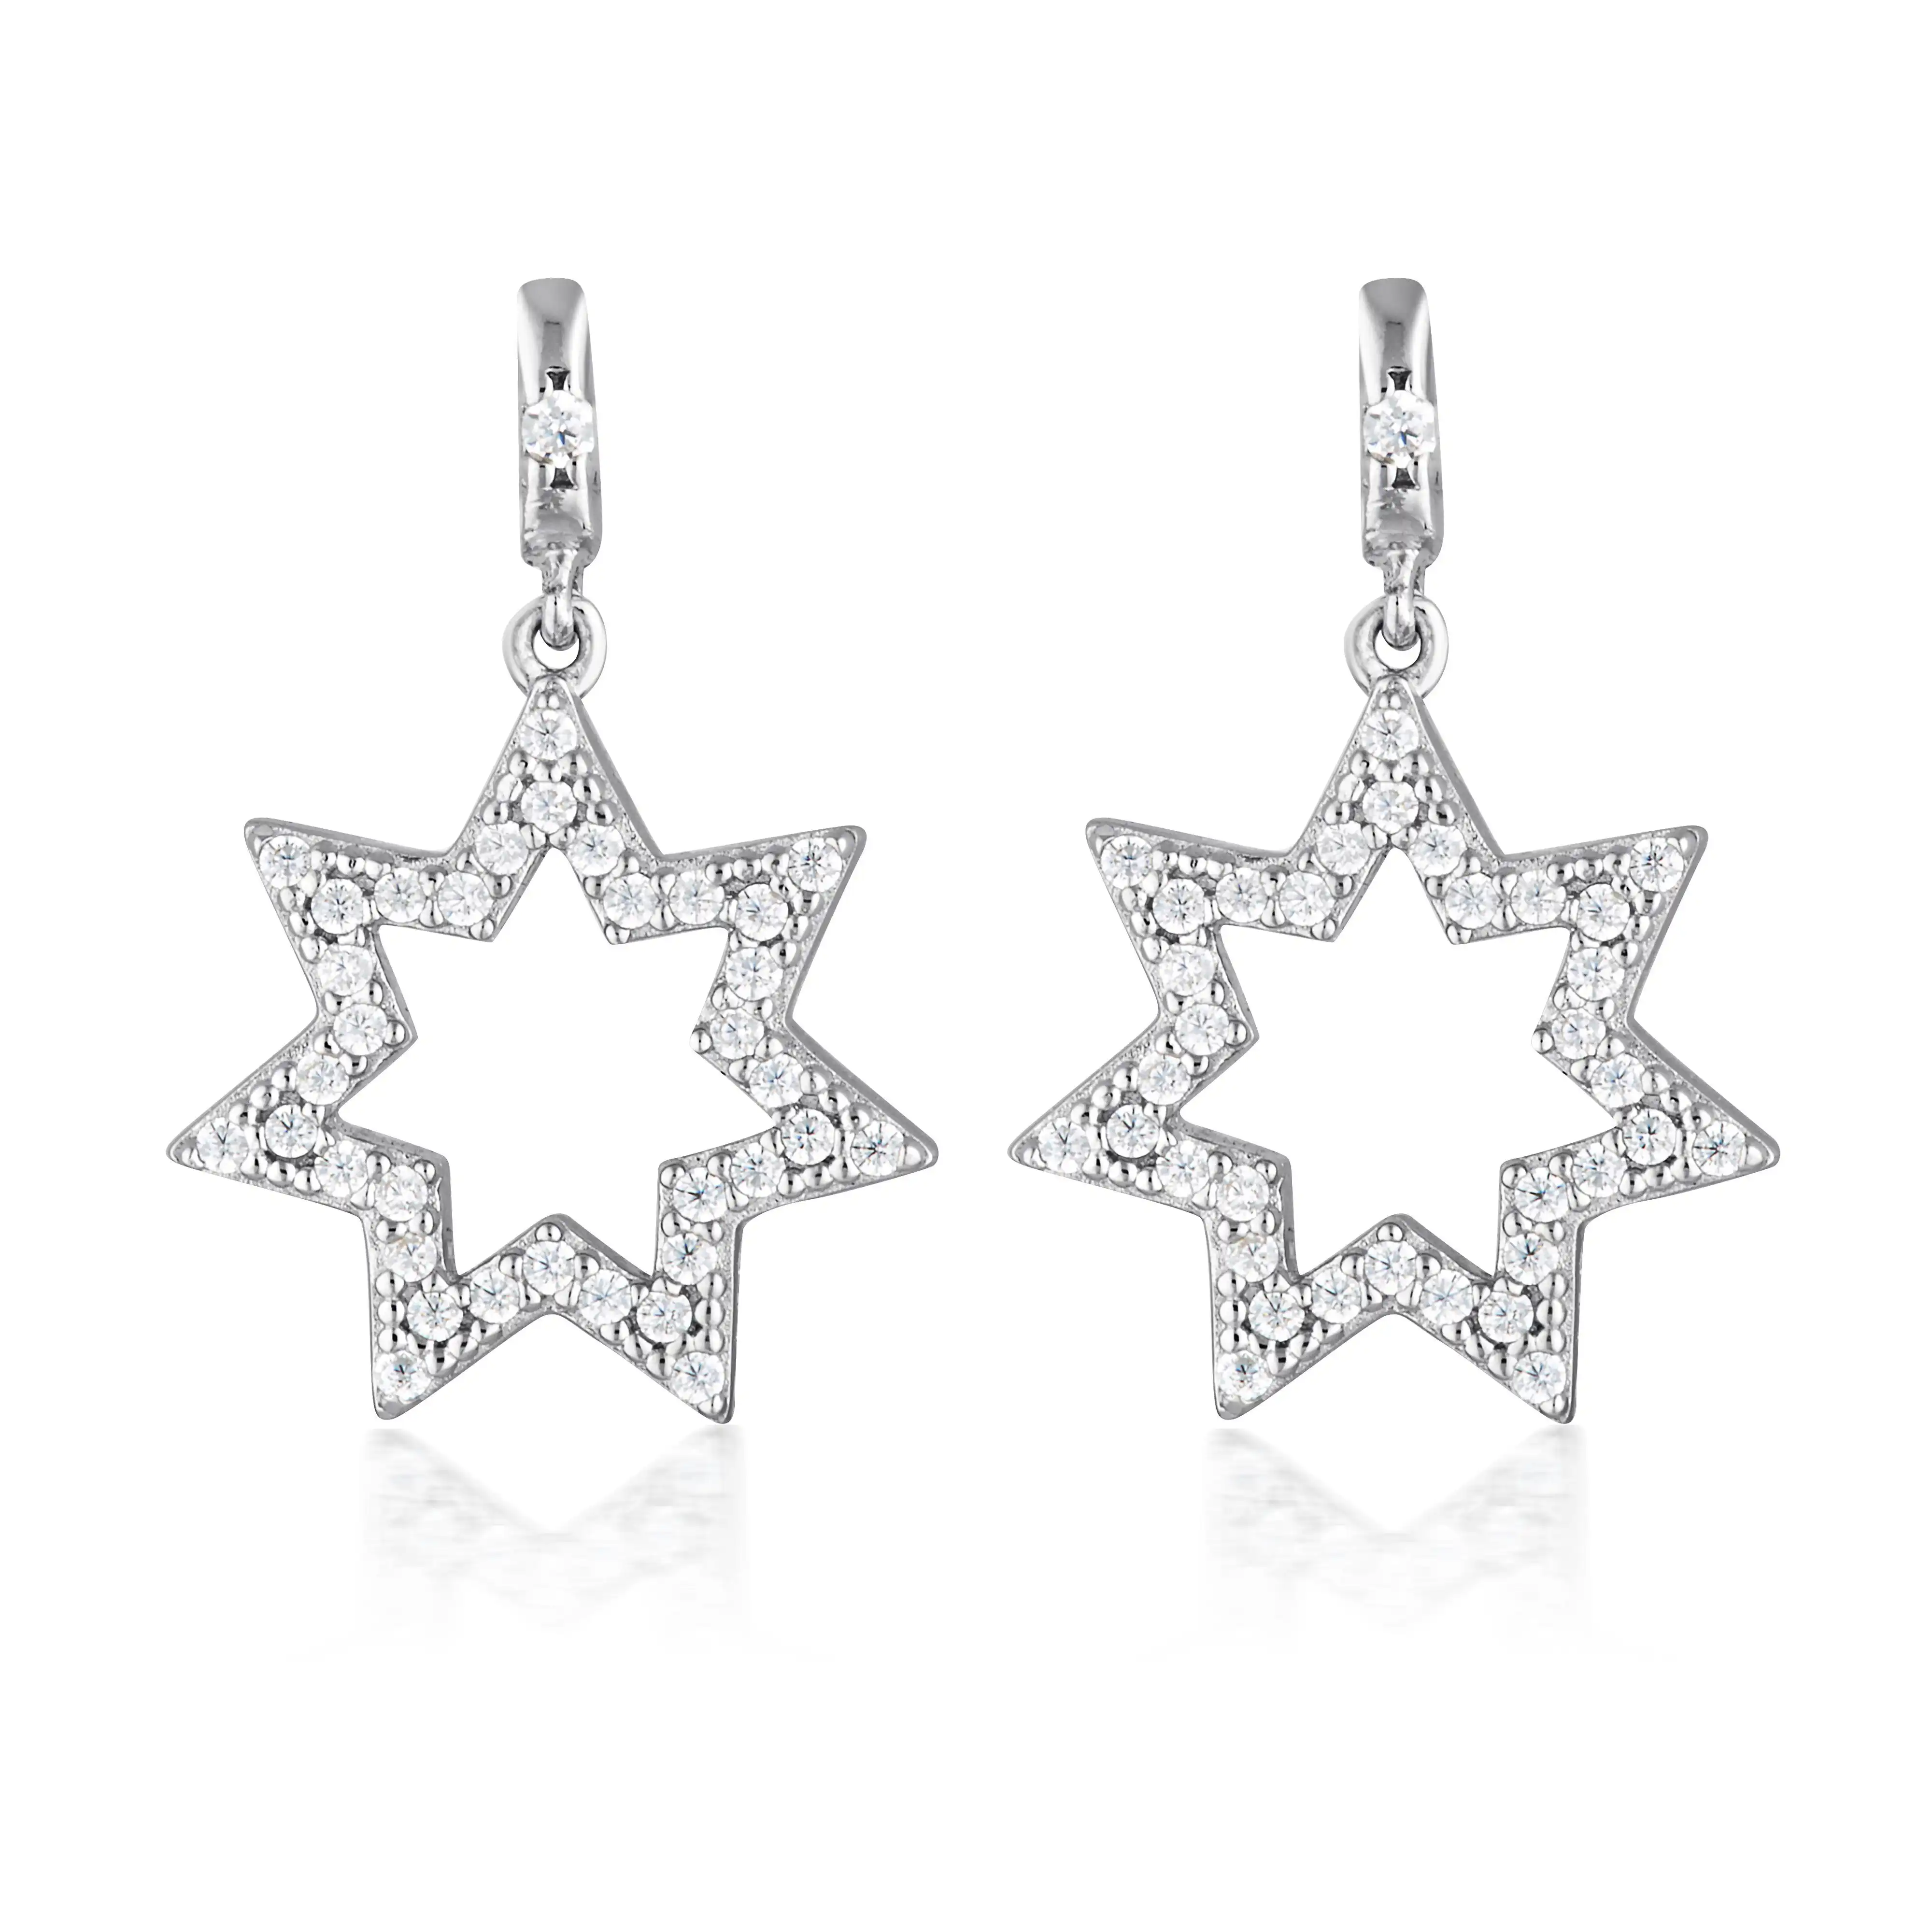 Georgini Commonwealth Collection Star Earrings Silver